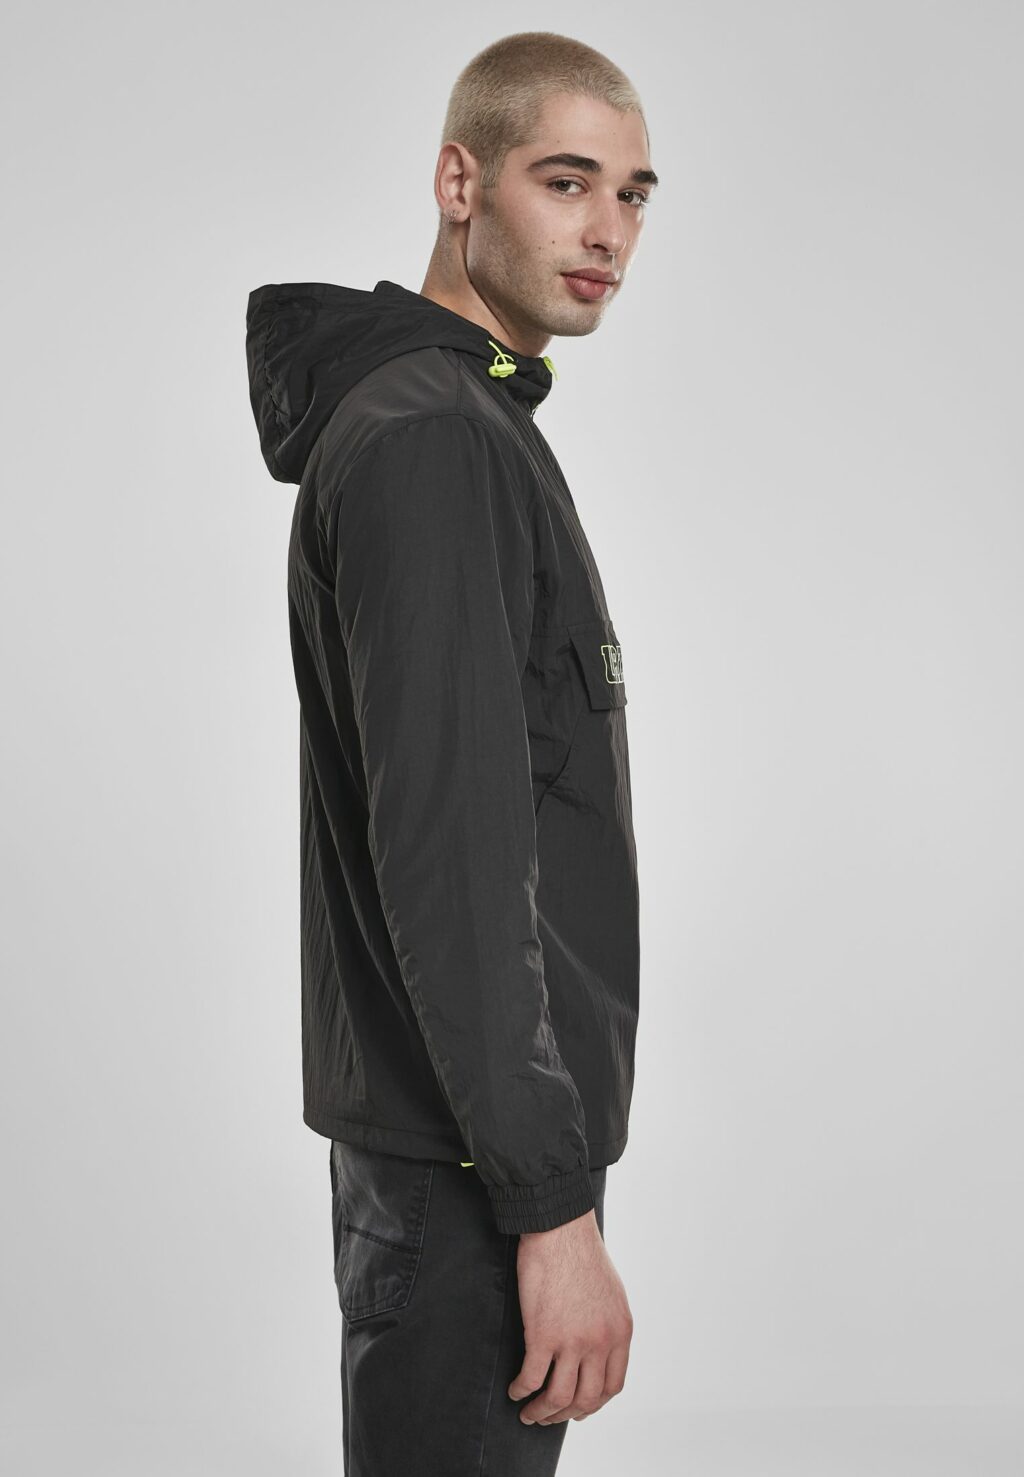 Urban Classics Contrast Pull Over Jacket black/electriclime TB3676